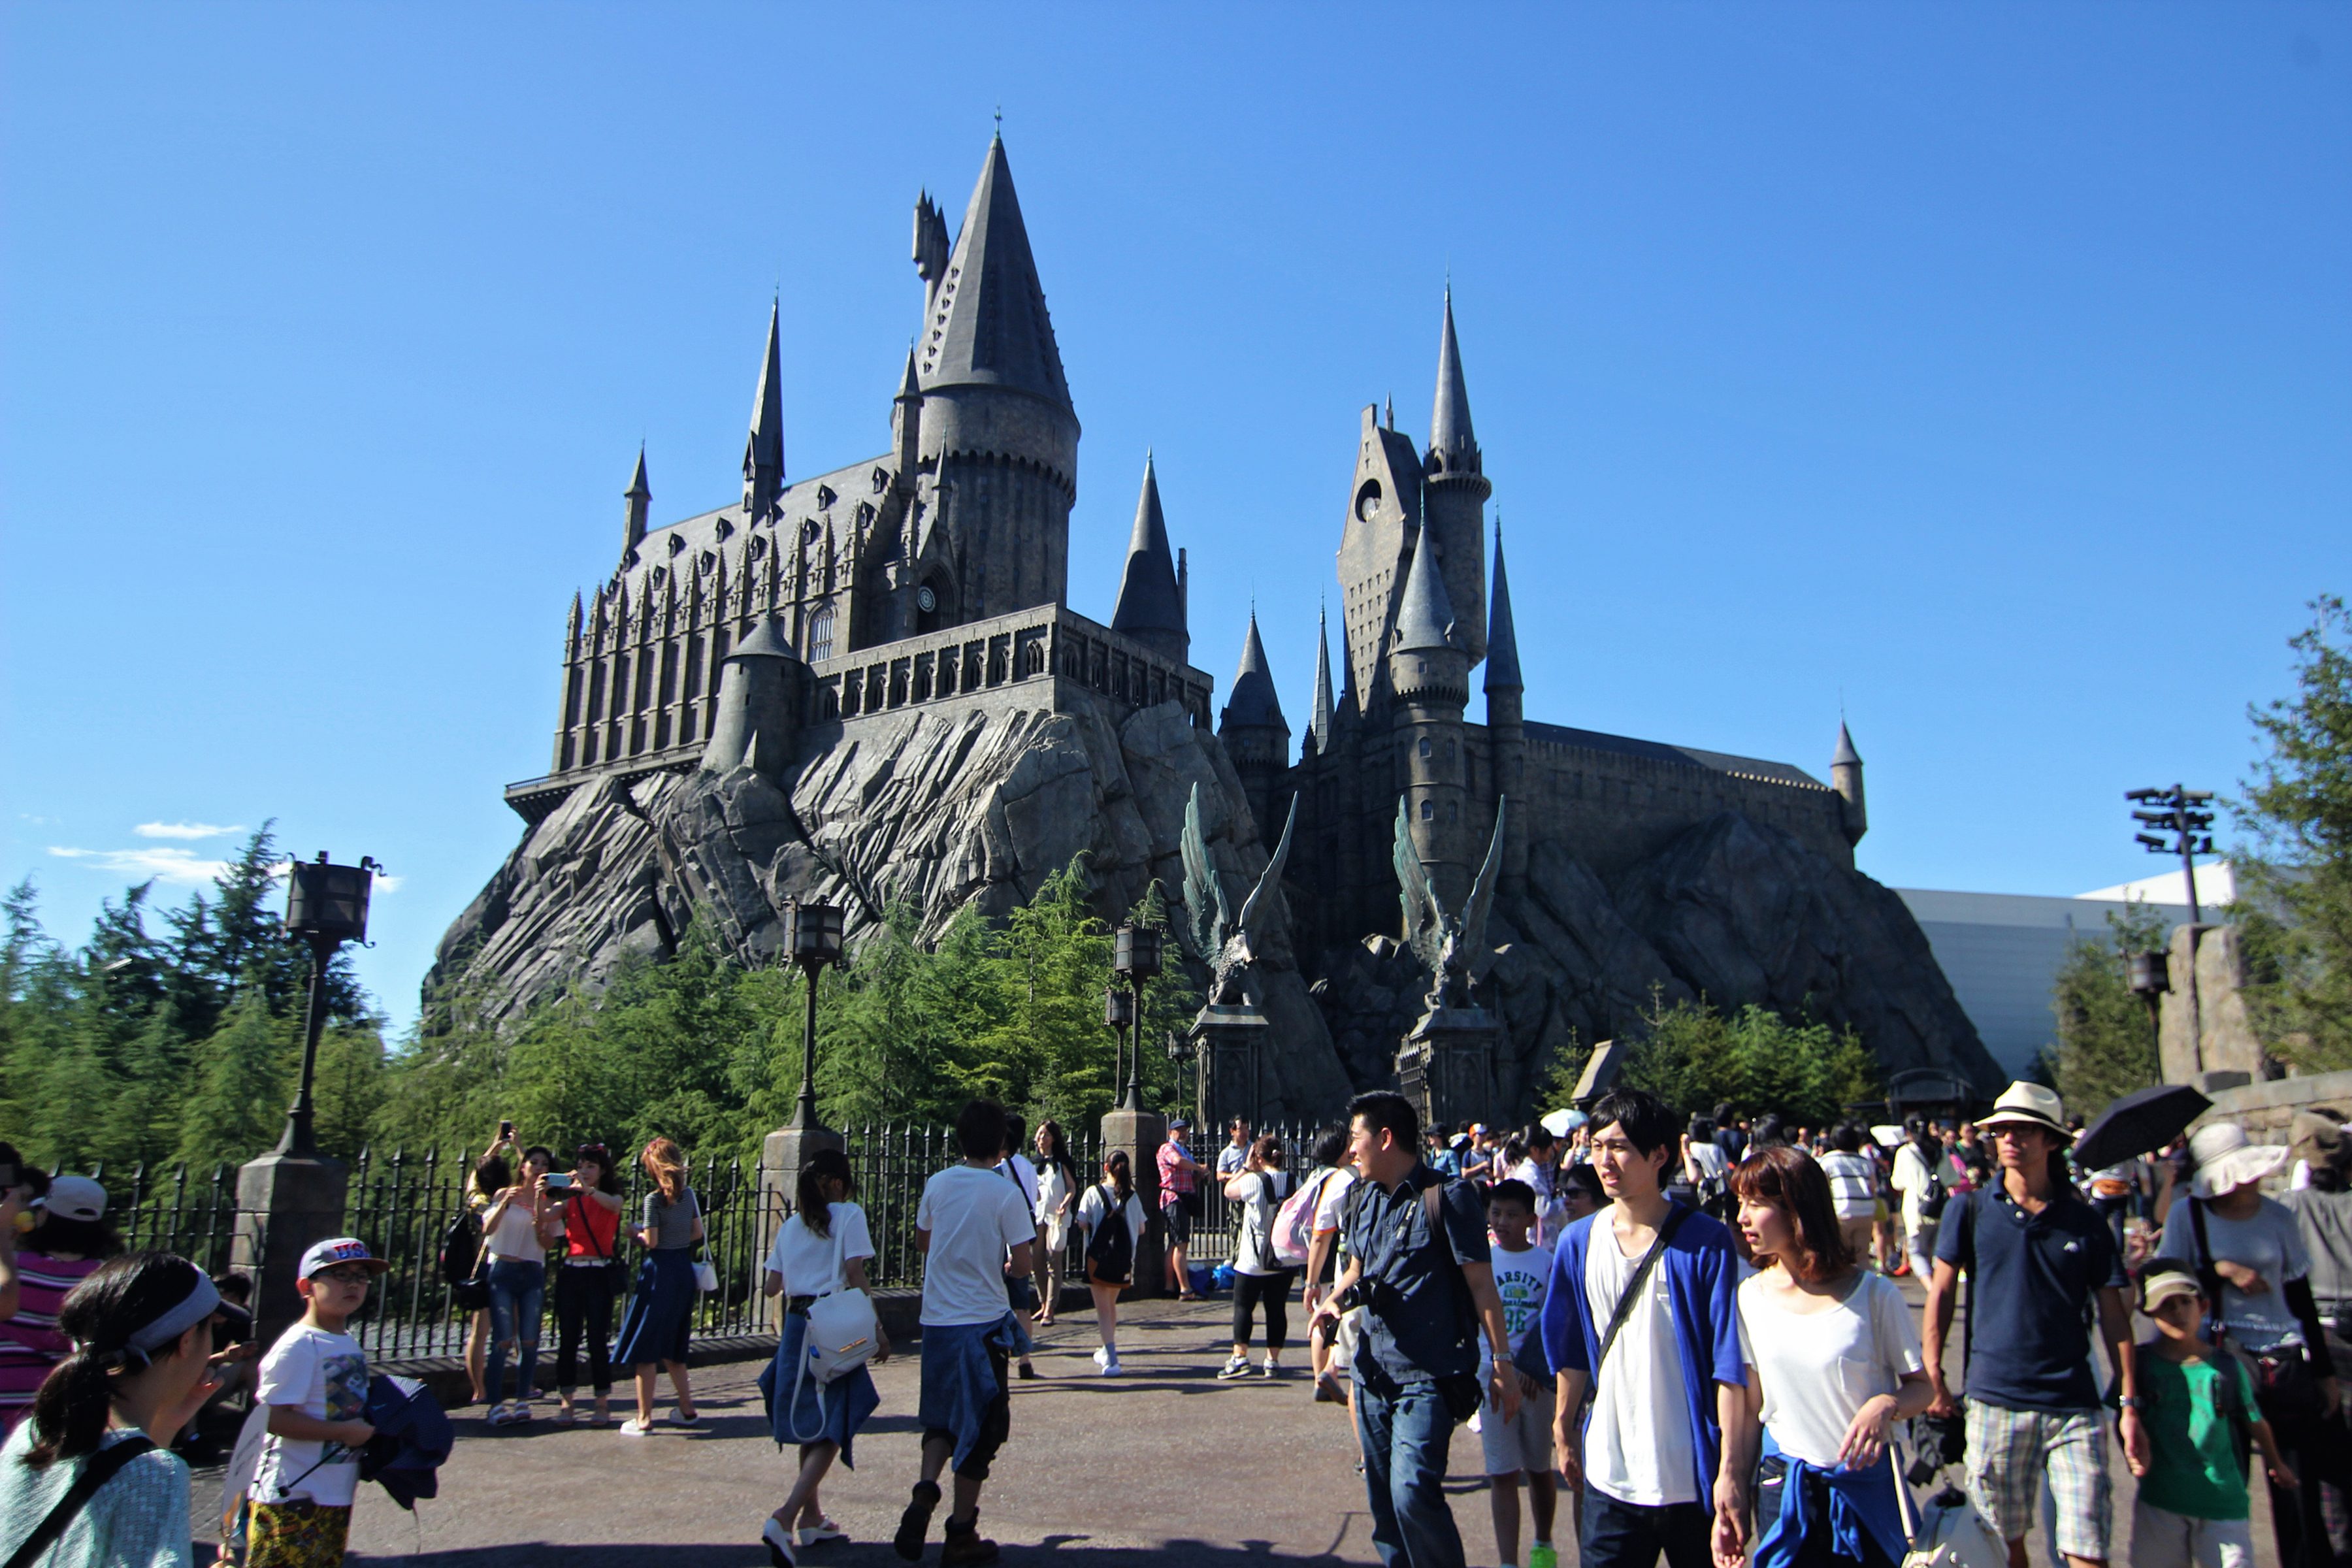 Visitors flock to the Wizarding World of Harry Potter in Japan where the famous Hogwarts castle can be seen. Photo by Franz Lopez/Rappler 